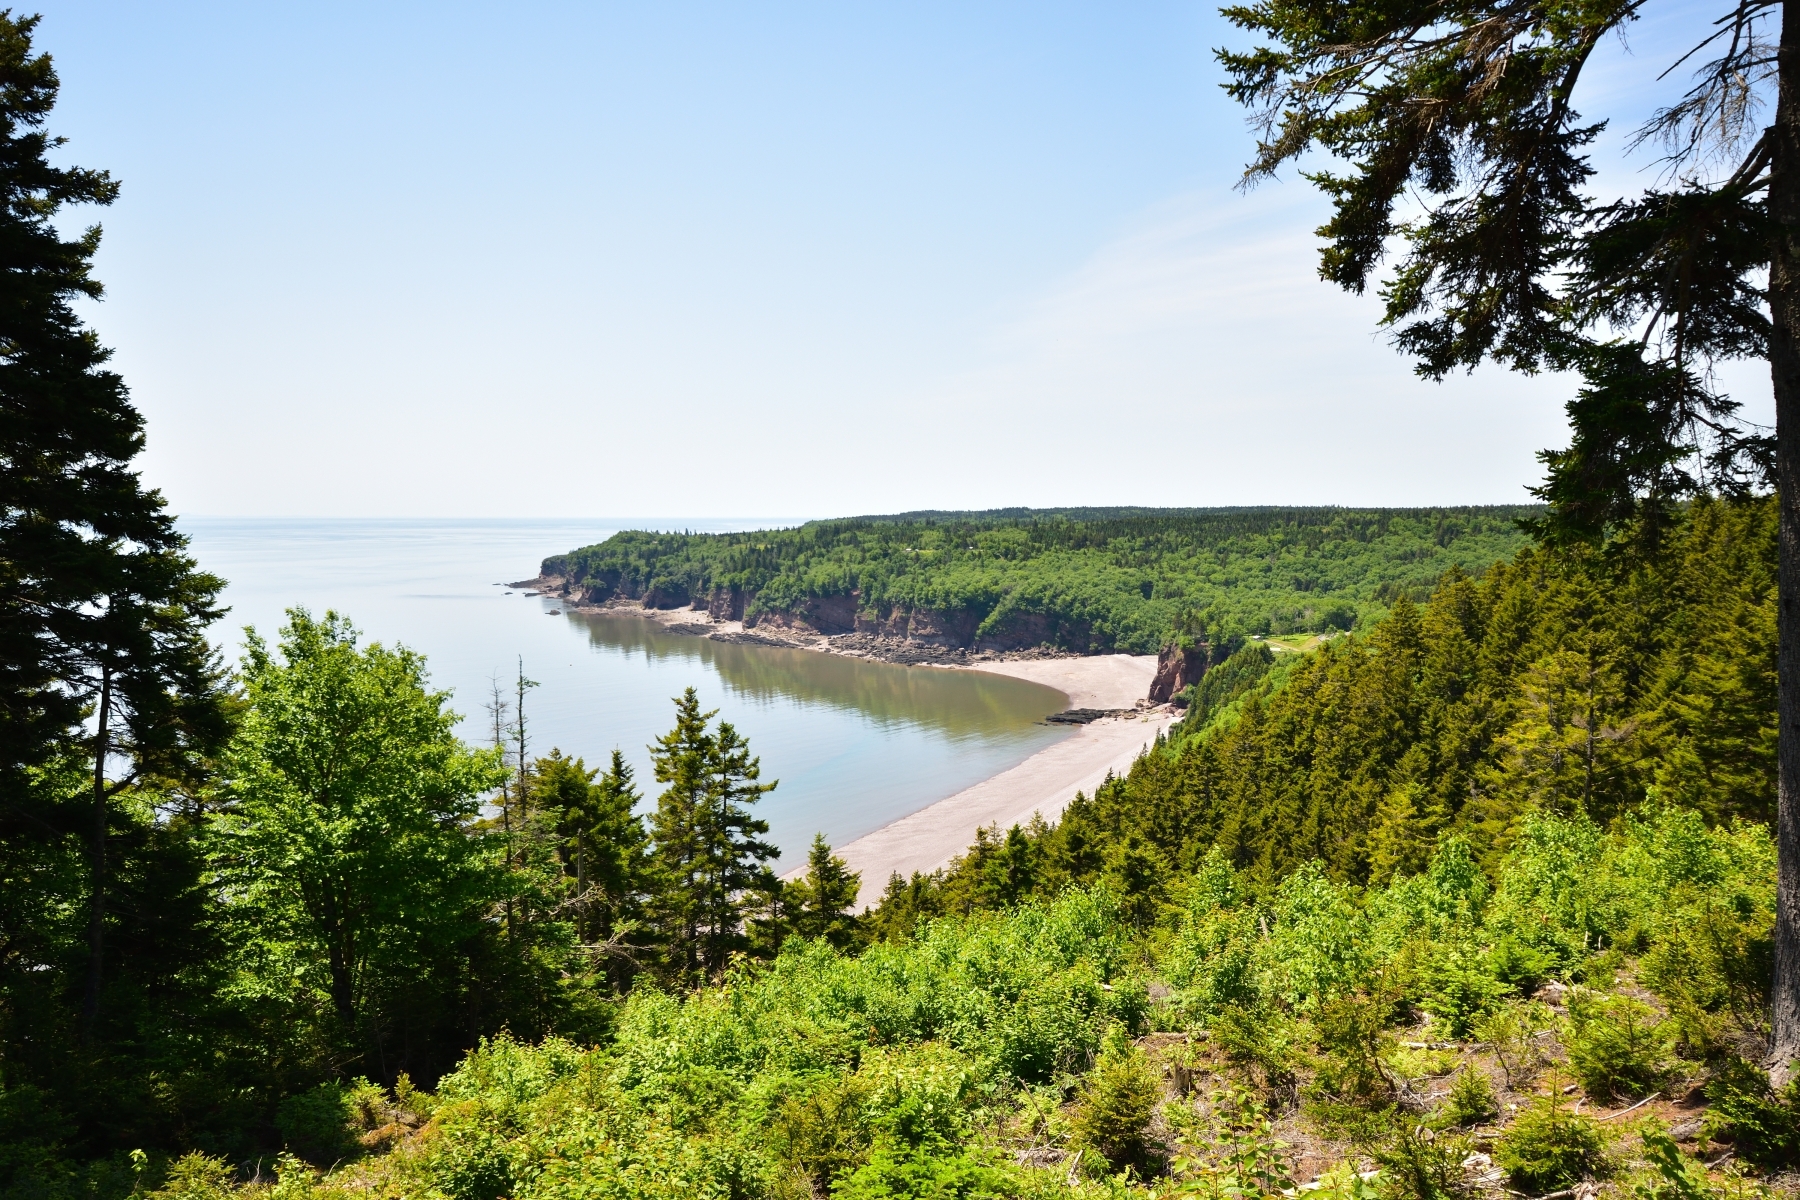 <p>If you’re looking to get away from it all for several days, why not go for the <a href="https://www.pc.gc.ca/en/pn-np/nb/fundy/activ/activites-plein-air-outdoor-activities/sentiers-trails/circuit" rel="noreferrer noopener">Fundy Circuit</a>? This 48-kilometre trail takes three to five days to complete. With an elevation gain of over <a href="https://www.alltrails.com/explore/recording/fundy-circuit-fundy-national-park--2" rel="noreferrer noopener">1,900 metres</a> spanning seven trails that alternately climb and descend, this route offers even experienced hikers little relief. <a href="https://theridgelinereport.com/the-fundy-circuit/" rel="noreferrer noopener">You’ll see it all</a>, though, including impressive lookouts, waterfalls, wooded trails, and a beach.</p>